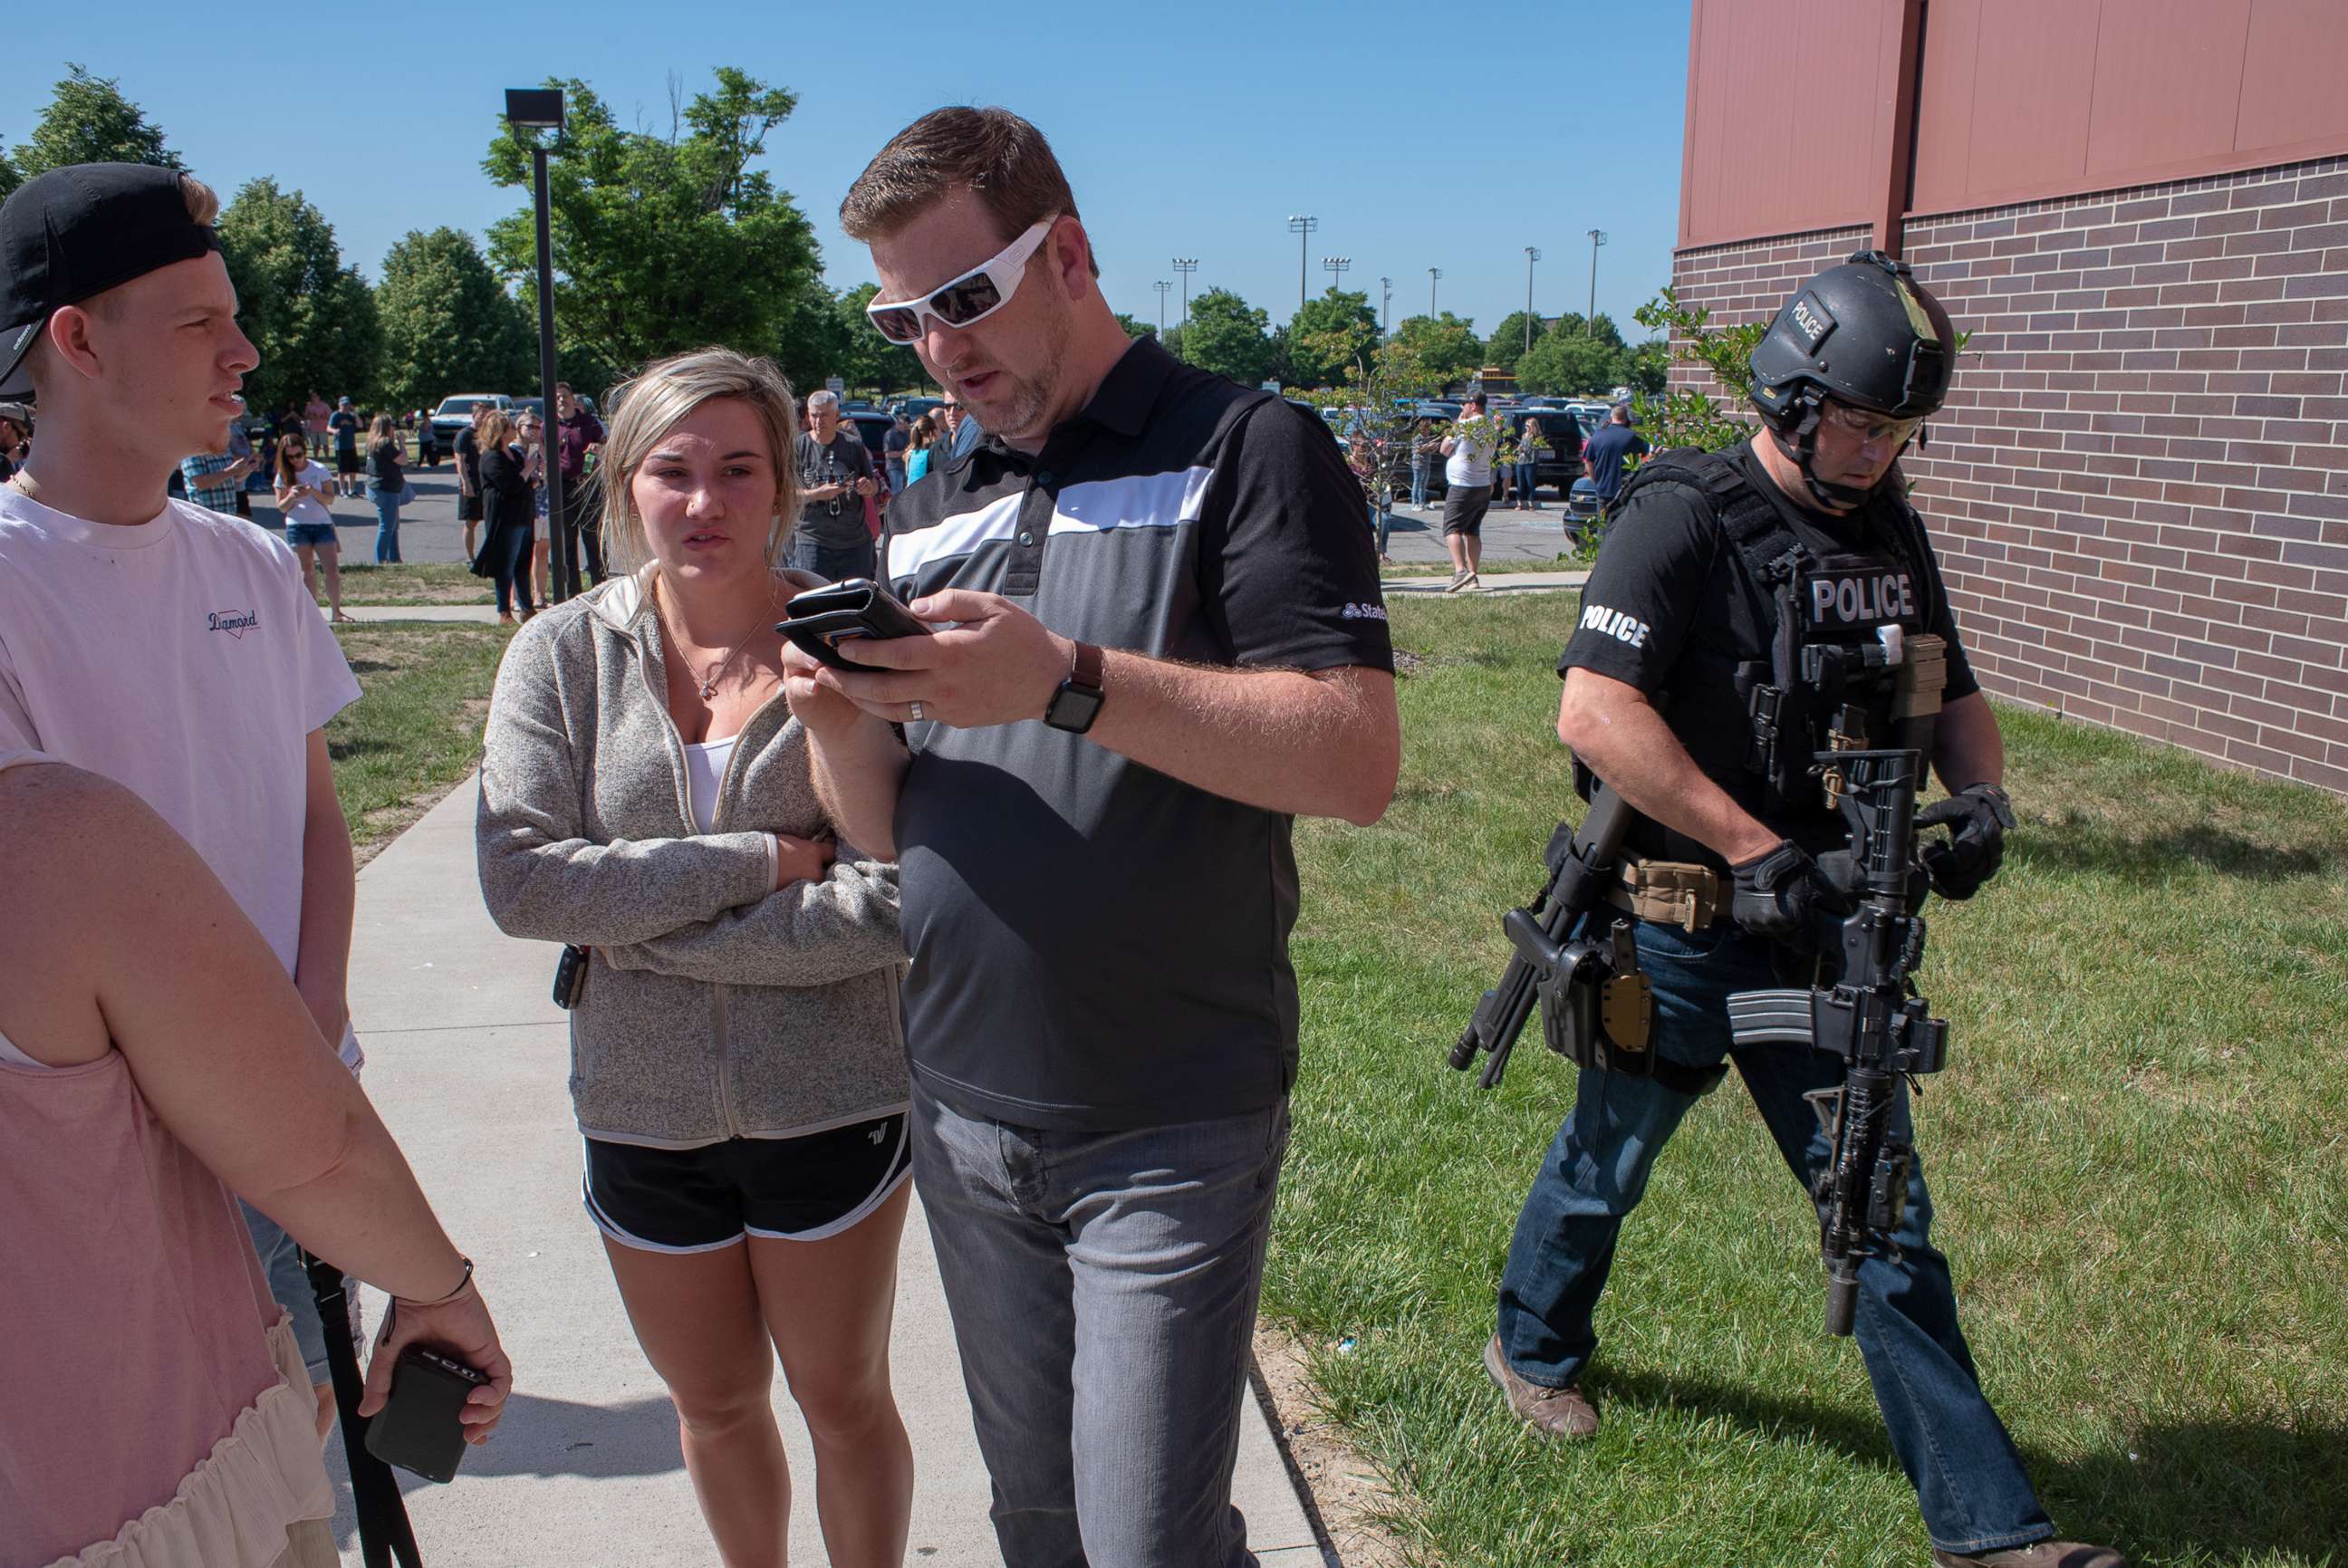 PHOTO: Parents wait while a SWAT officer passes outside Noblesville High School after a shooting at Noblesville West Middle School on May 25, 2018 in Noblesville, Ind.